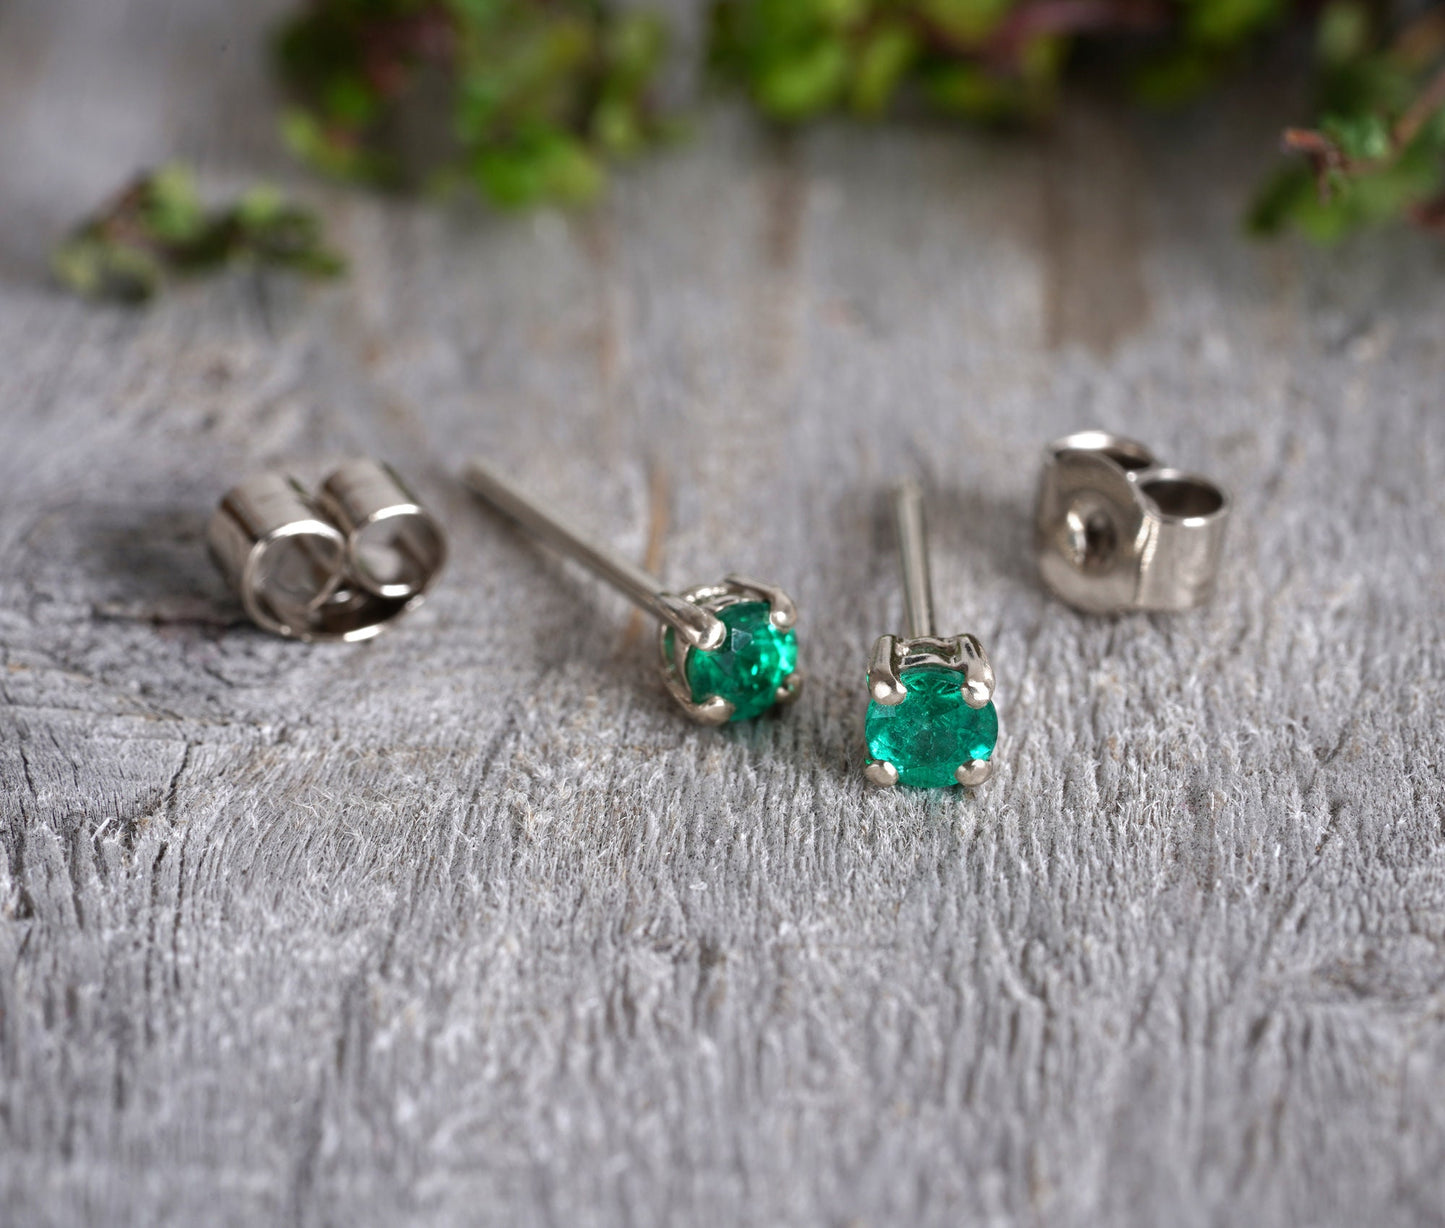 Emerald Stud Earrings in 18ct White Gold, Small Emerald Ear Posts